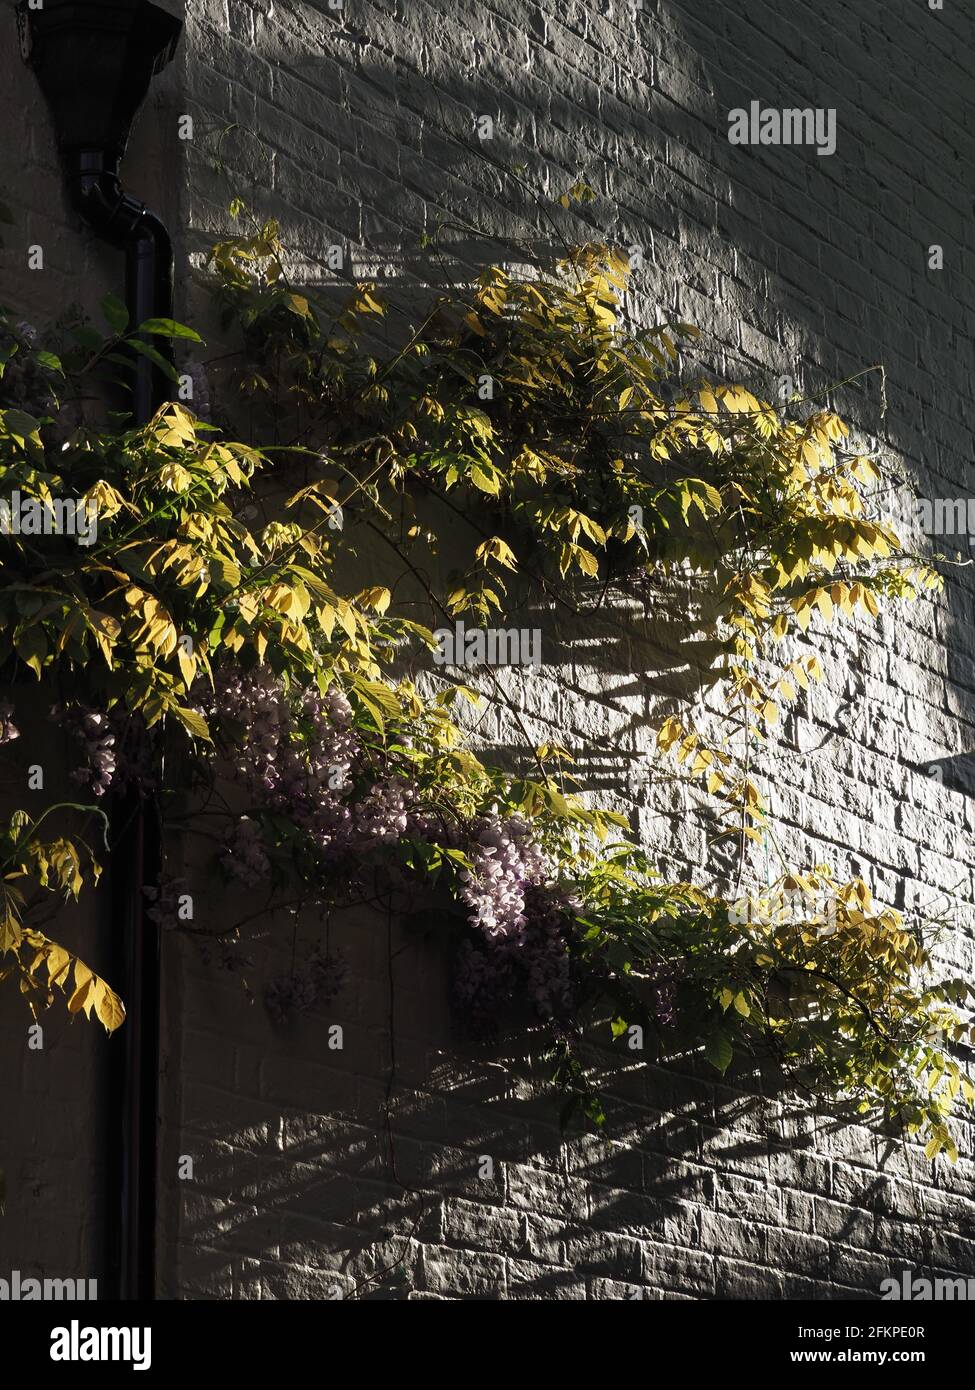 wisteria vine with flowers growing on white wall with dramatic directional lighting Stock Photo